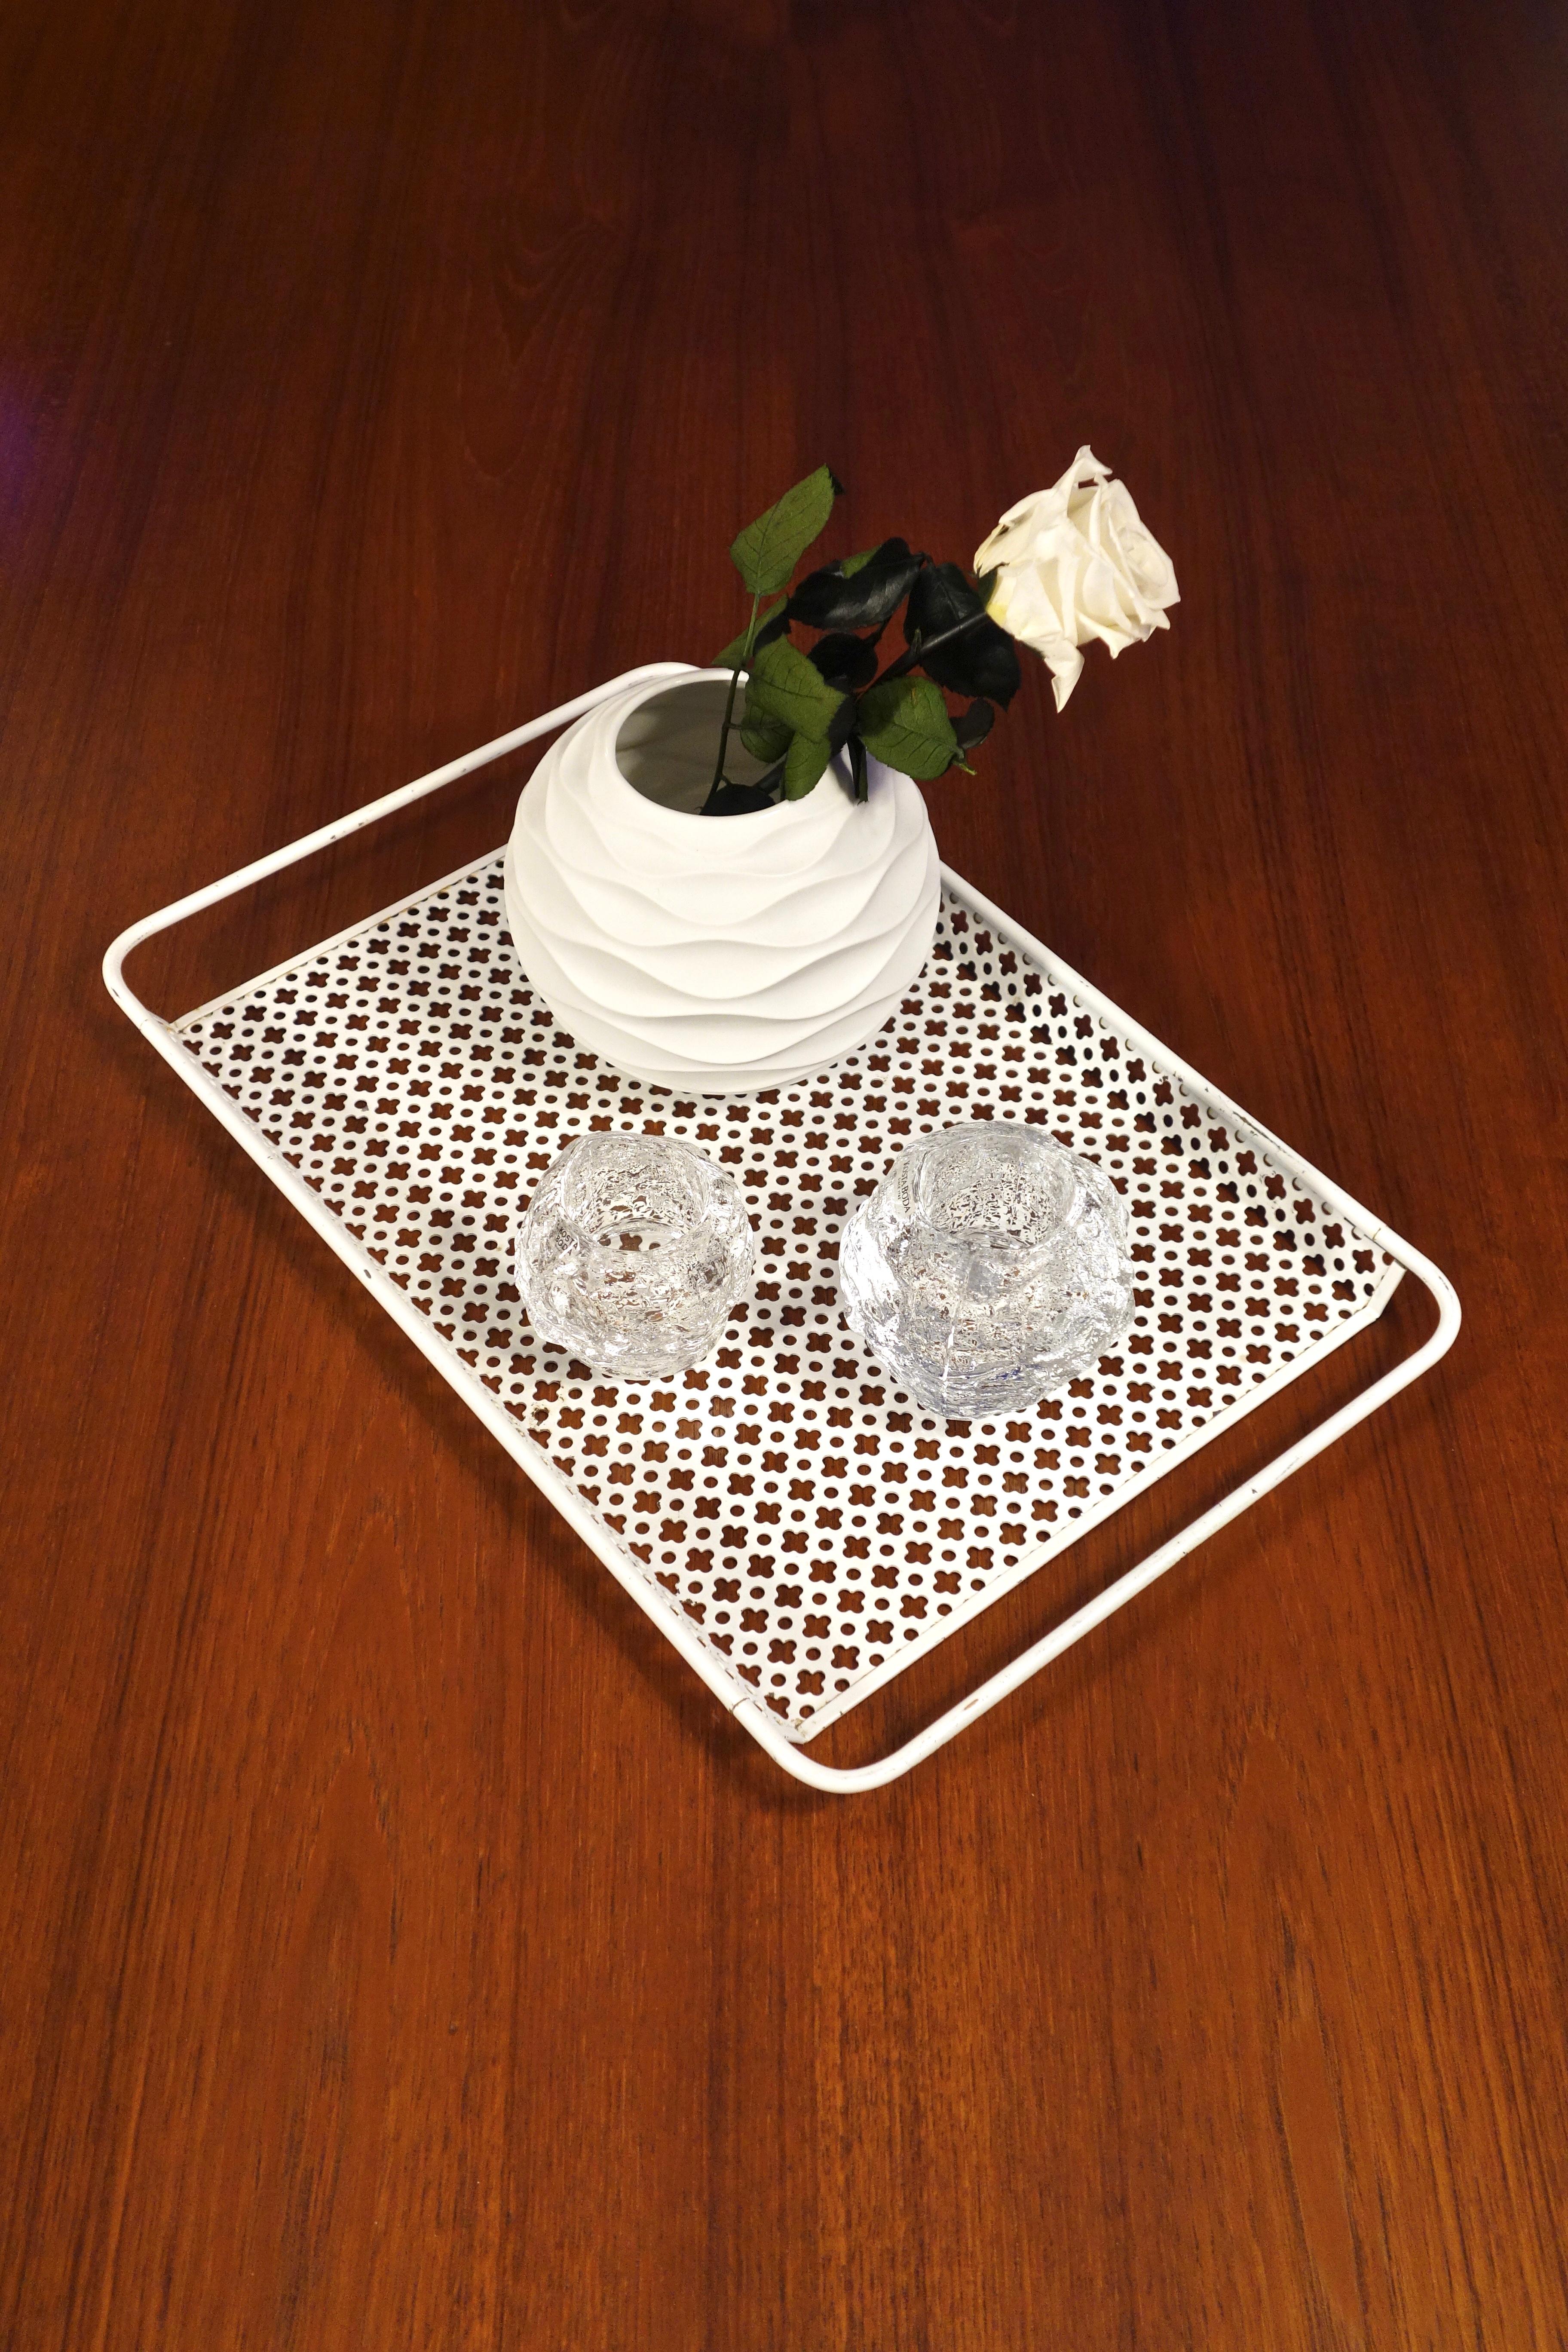 Vintage tray by Mathieu Matégot for Artimeta dating from the 1950s. Designed in France and manufactured in Holland. Rectangular format in off-white lacquered perforated metal. Beautiful state of conservation, this tray shows some traces of time. It